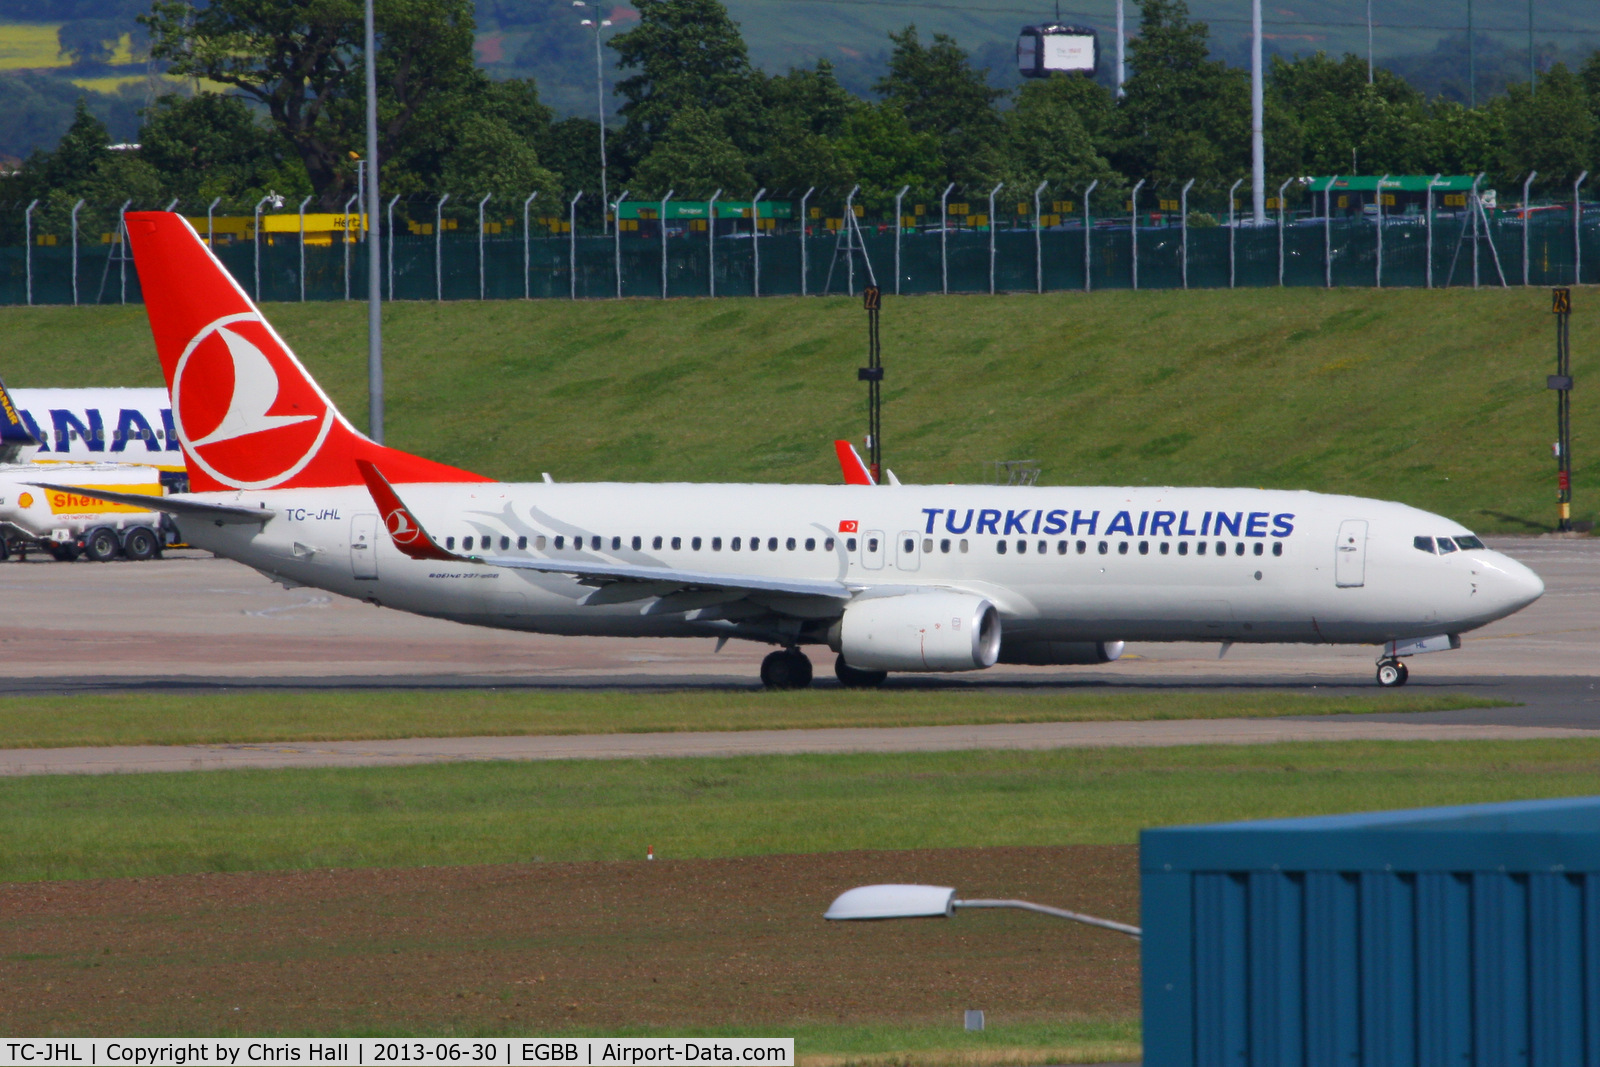 TC-JHL, 2011 Boeing 737-8F2 C/N 40976, now back in the standard Turkish Airlines livery after wearing the  